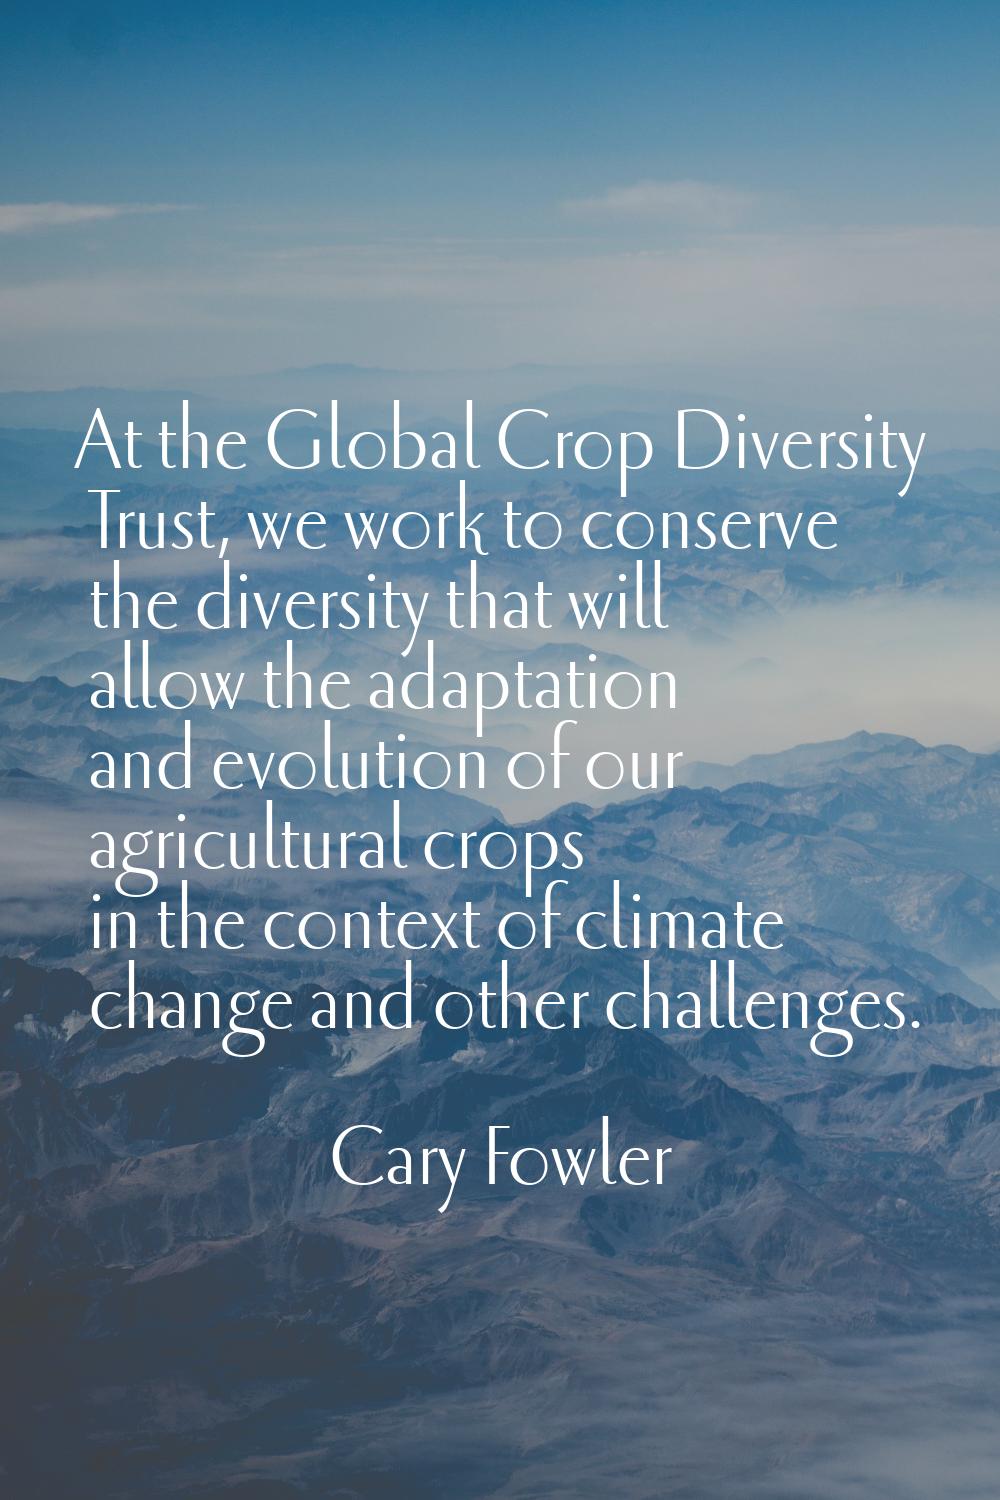 At the Global Crop Diversity Trust, we work to conserve the diversity that will allow the adaptatio